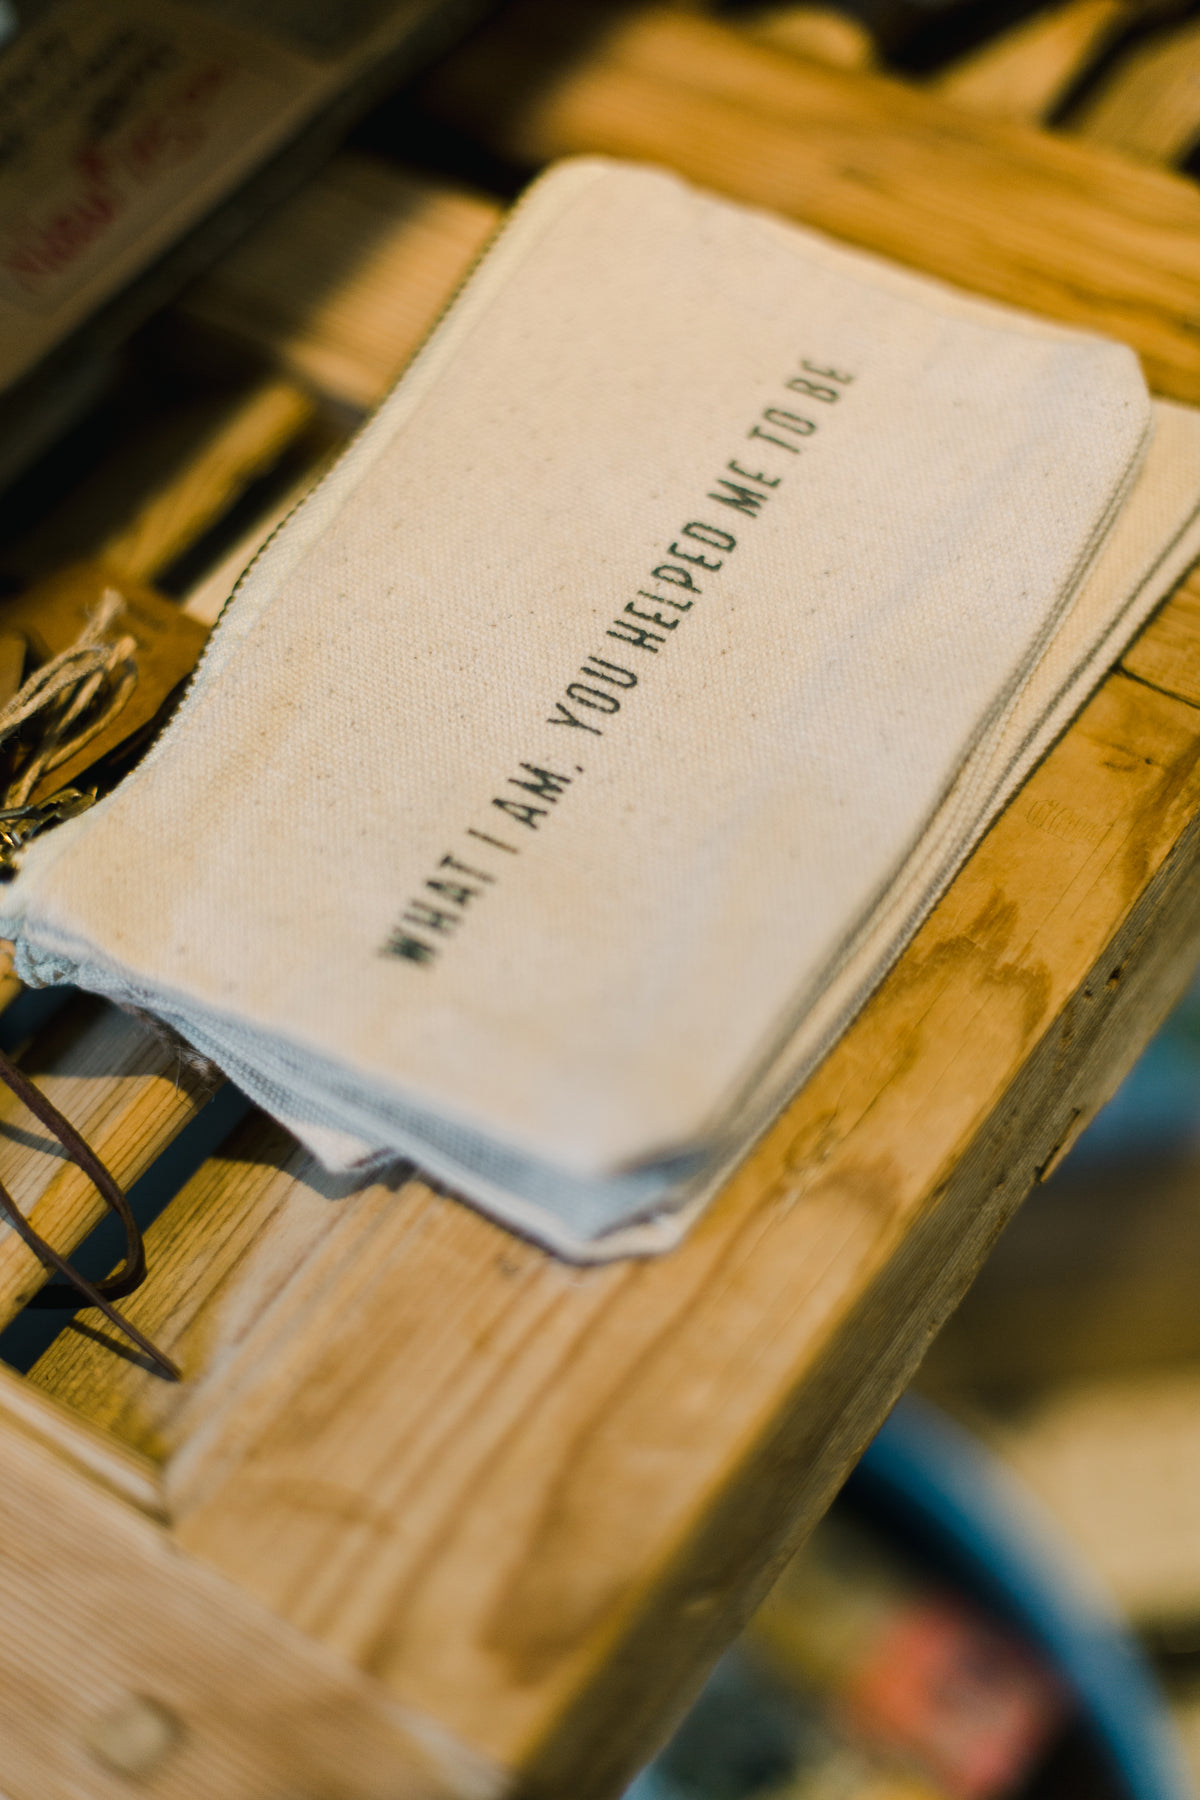 cloth bag with text on a wooden shelf